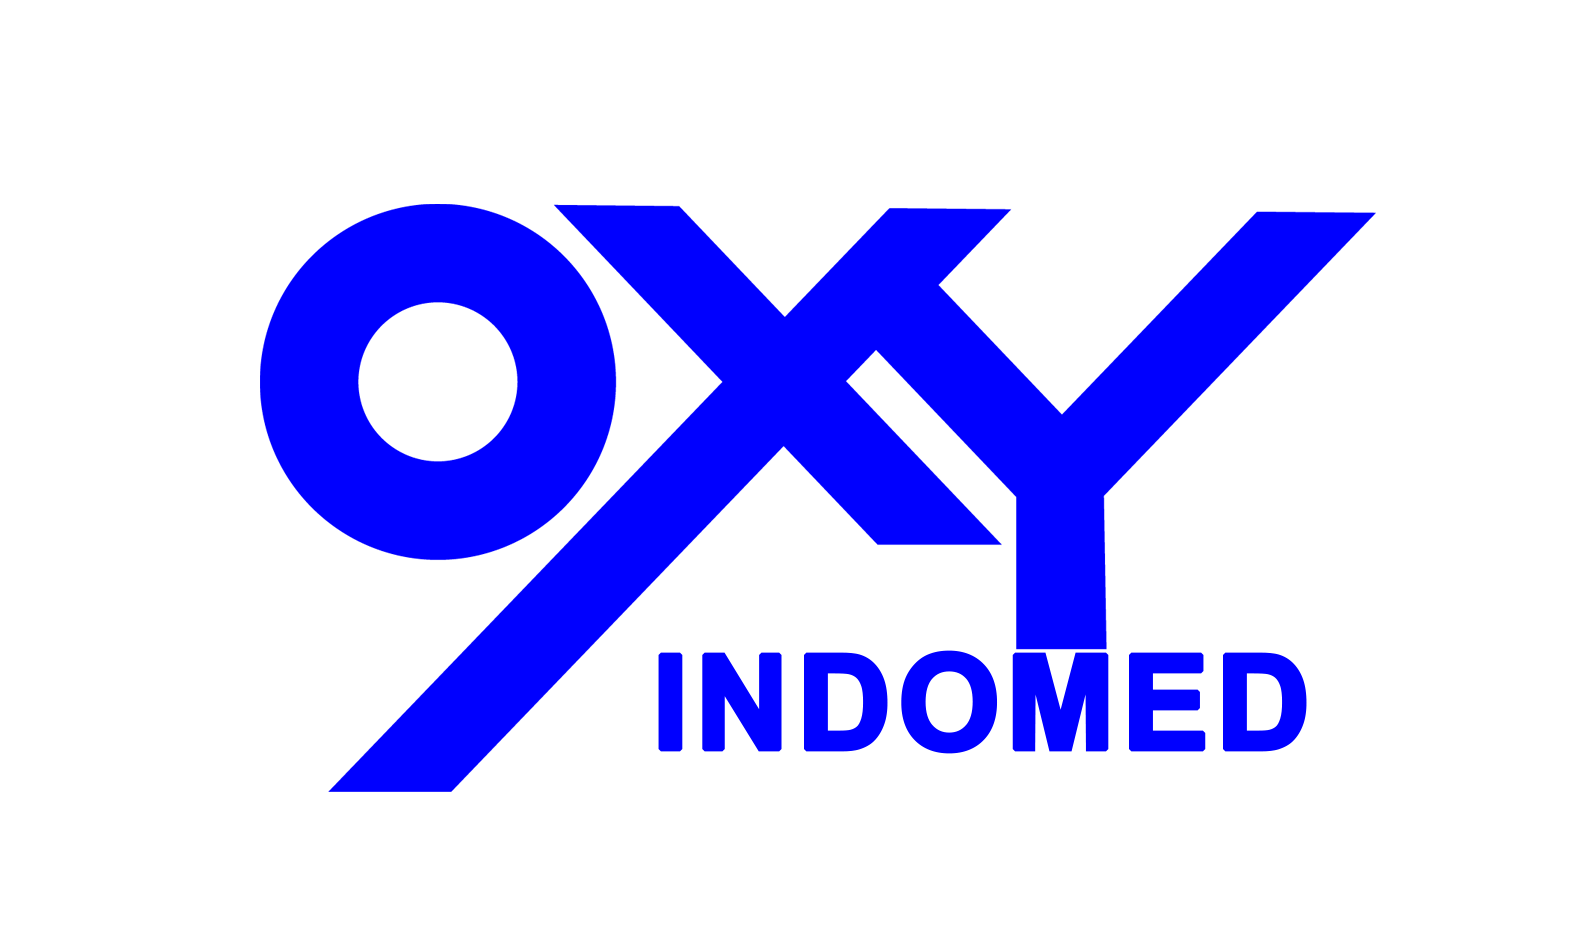 Oxy Indomed